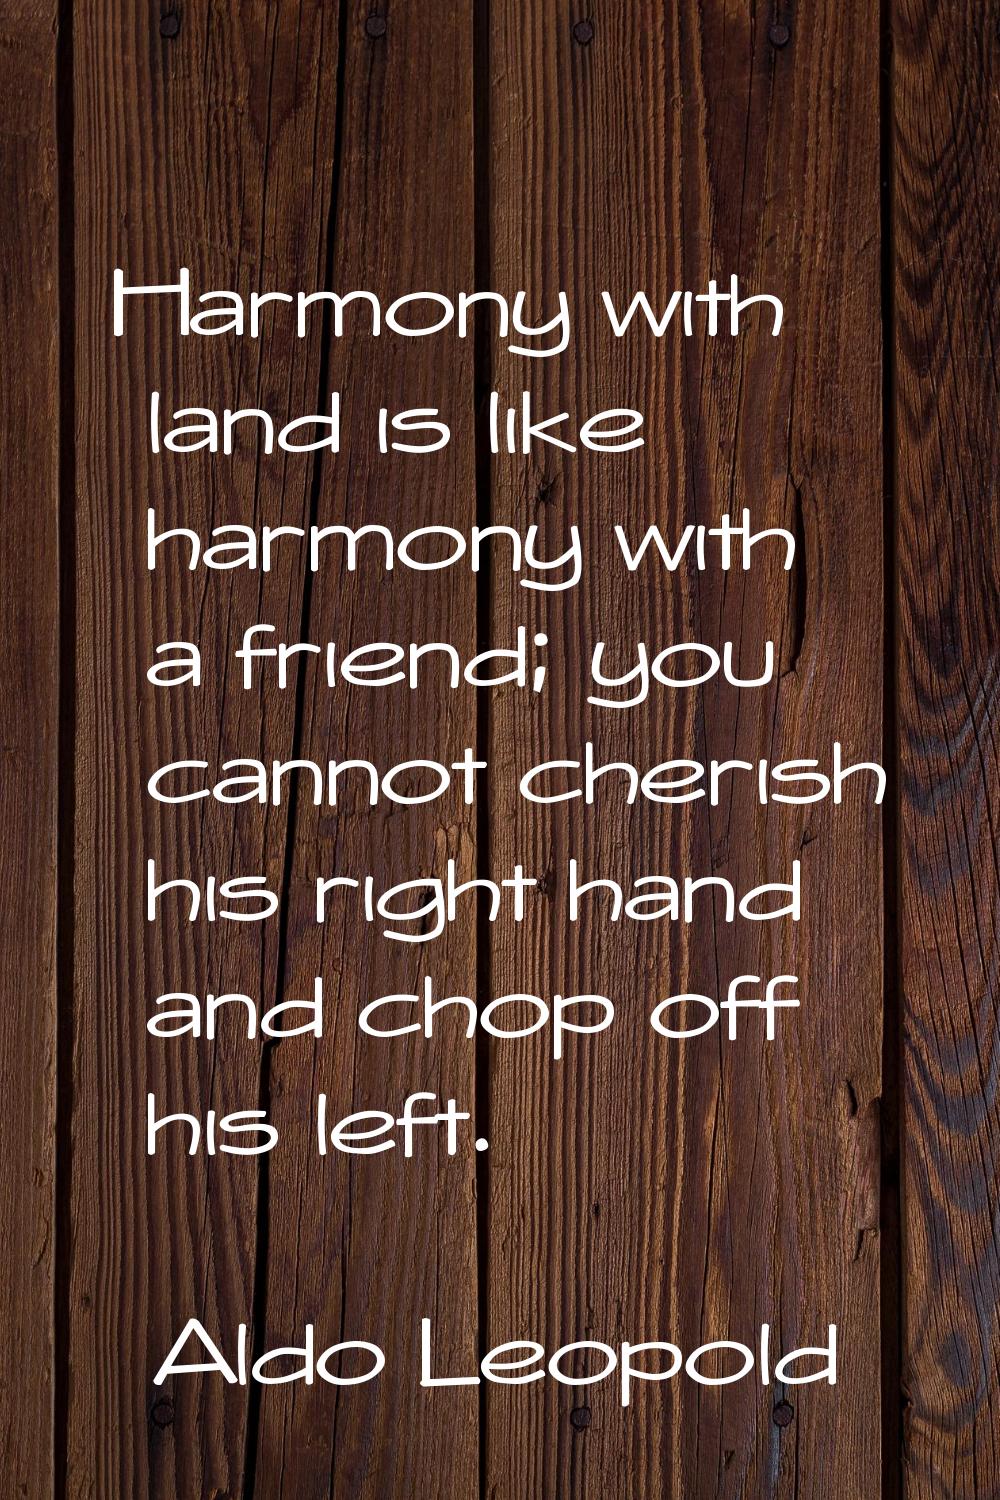 Harmony with land is like harmony with a friend; you cannot cherish his right hand and chop off his